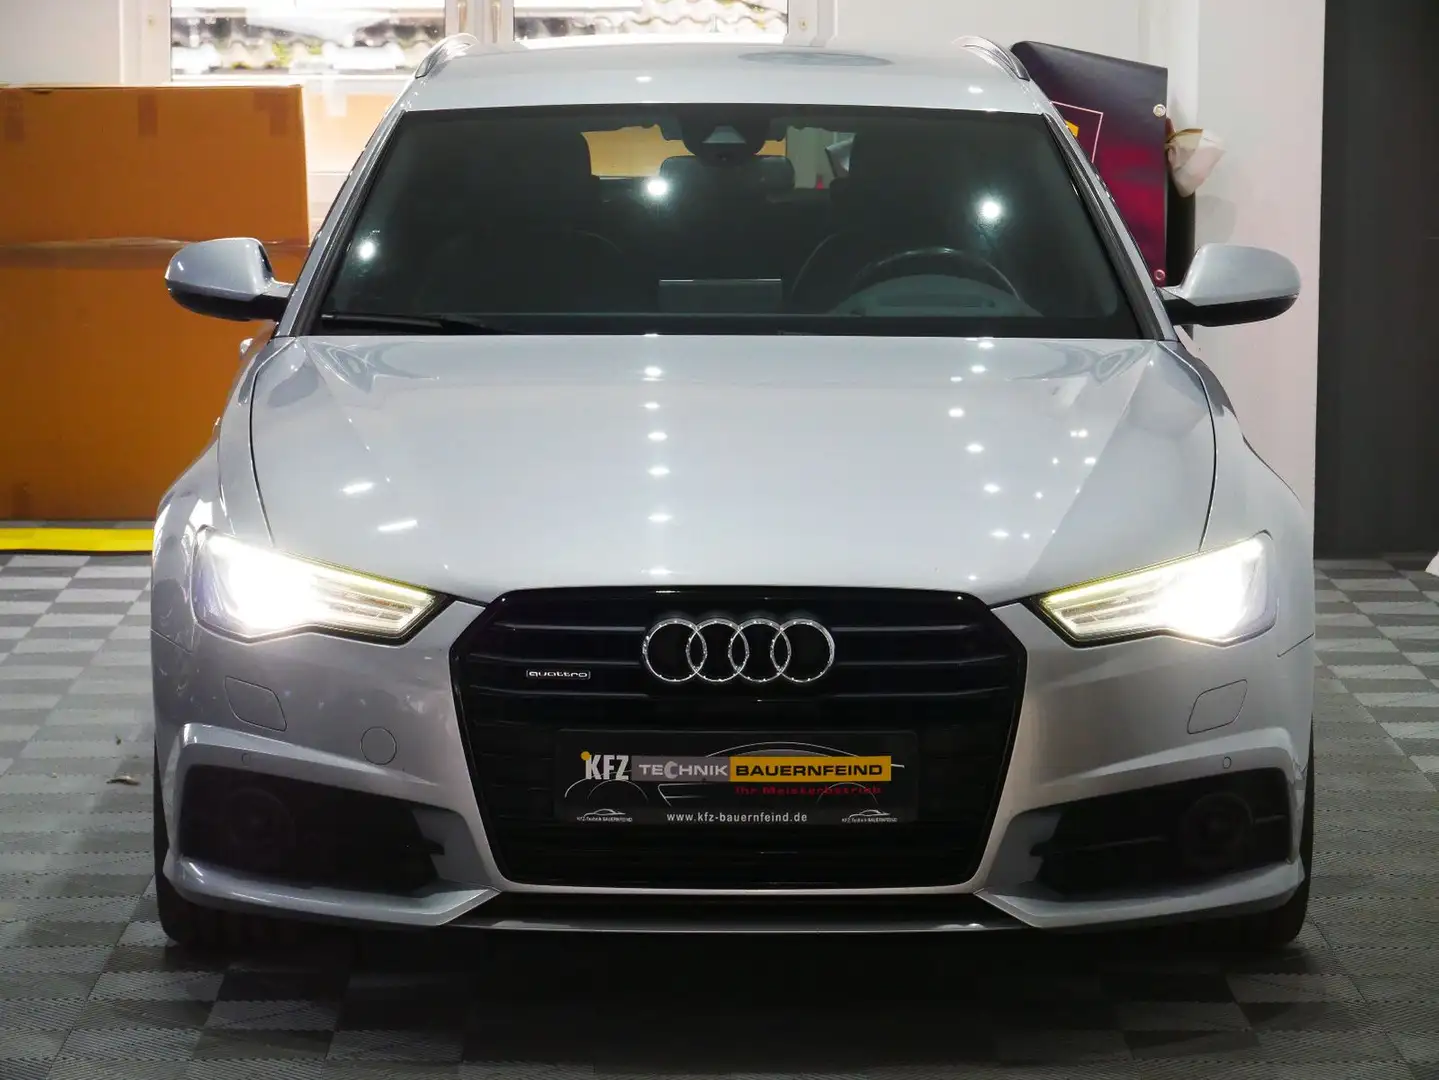 Audi A6 Avant 3.0 TDI quattro competition UST-ausweis Silber - 2